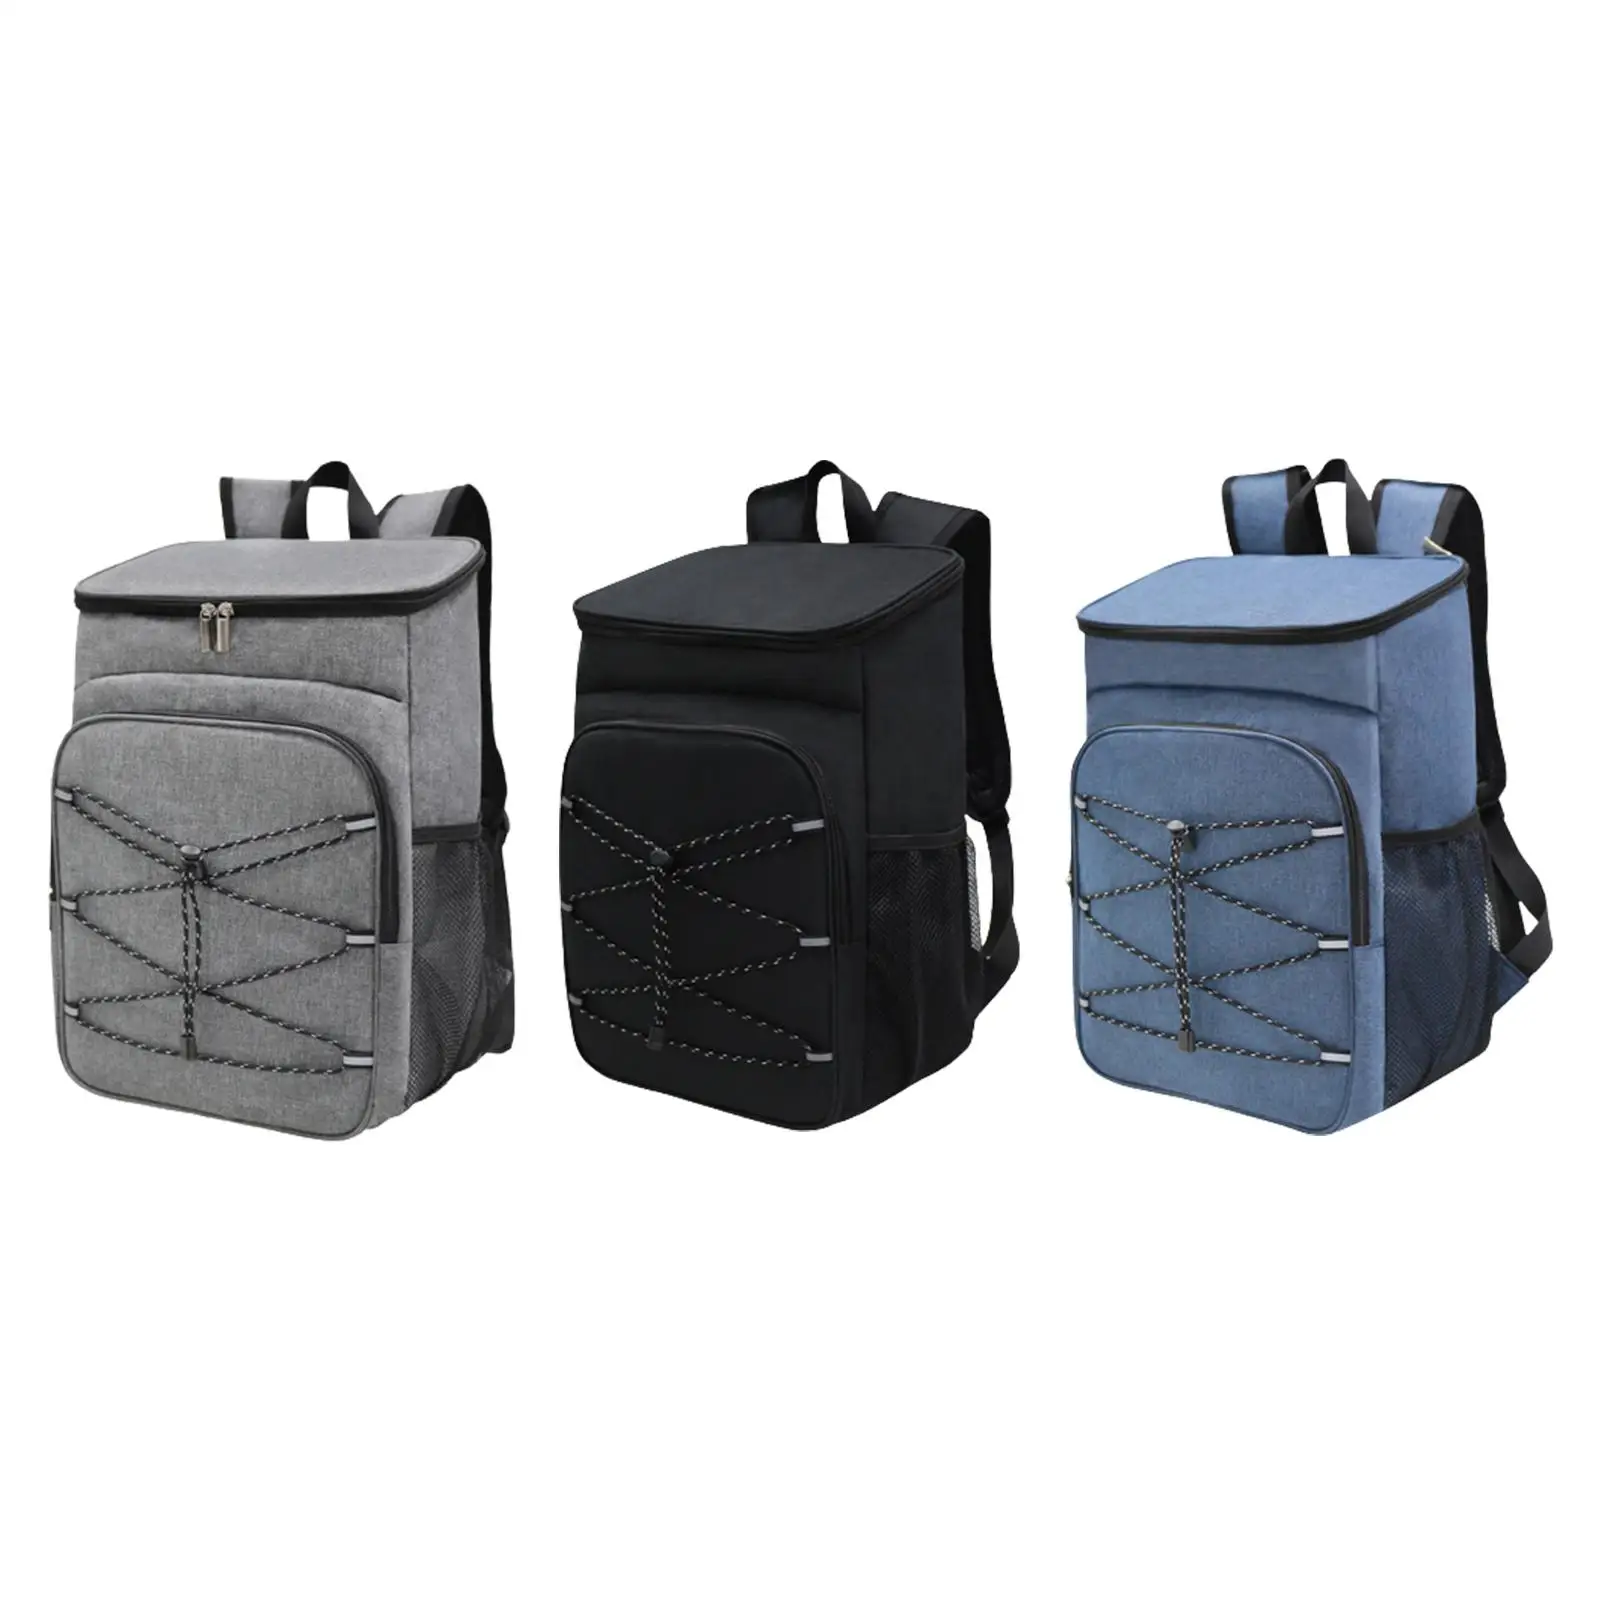 Insulated Cooler Backpack Waterproof Cooler Bag Waterproof Lunch Backpack Beach Cooler Beer Bag for Work Lunch Hiking Travel